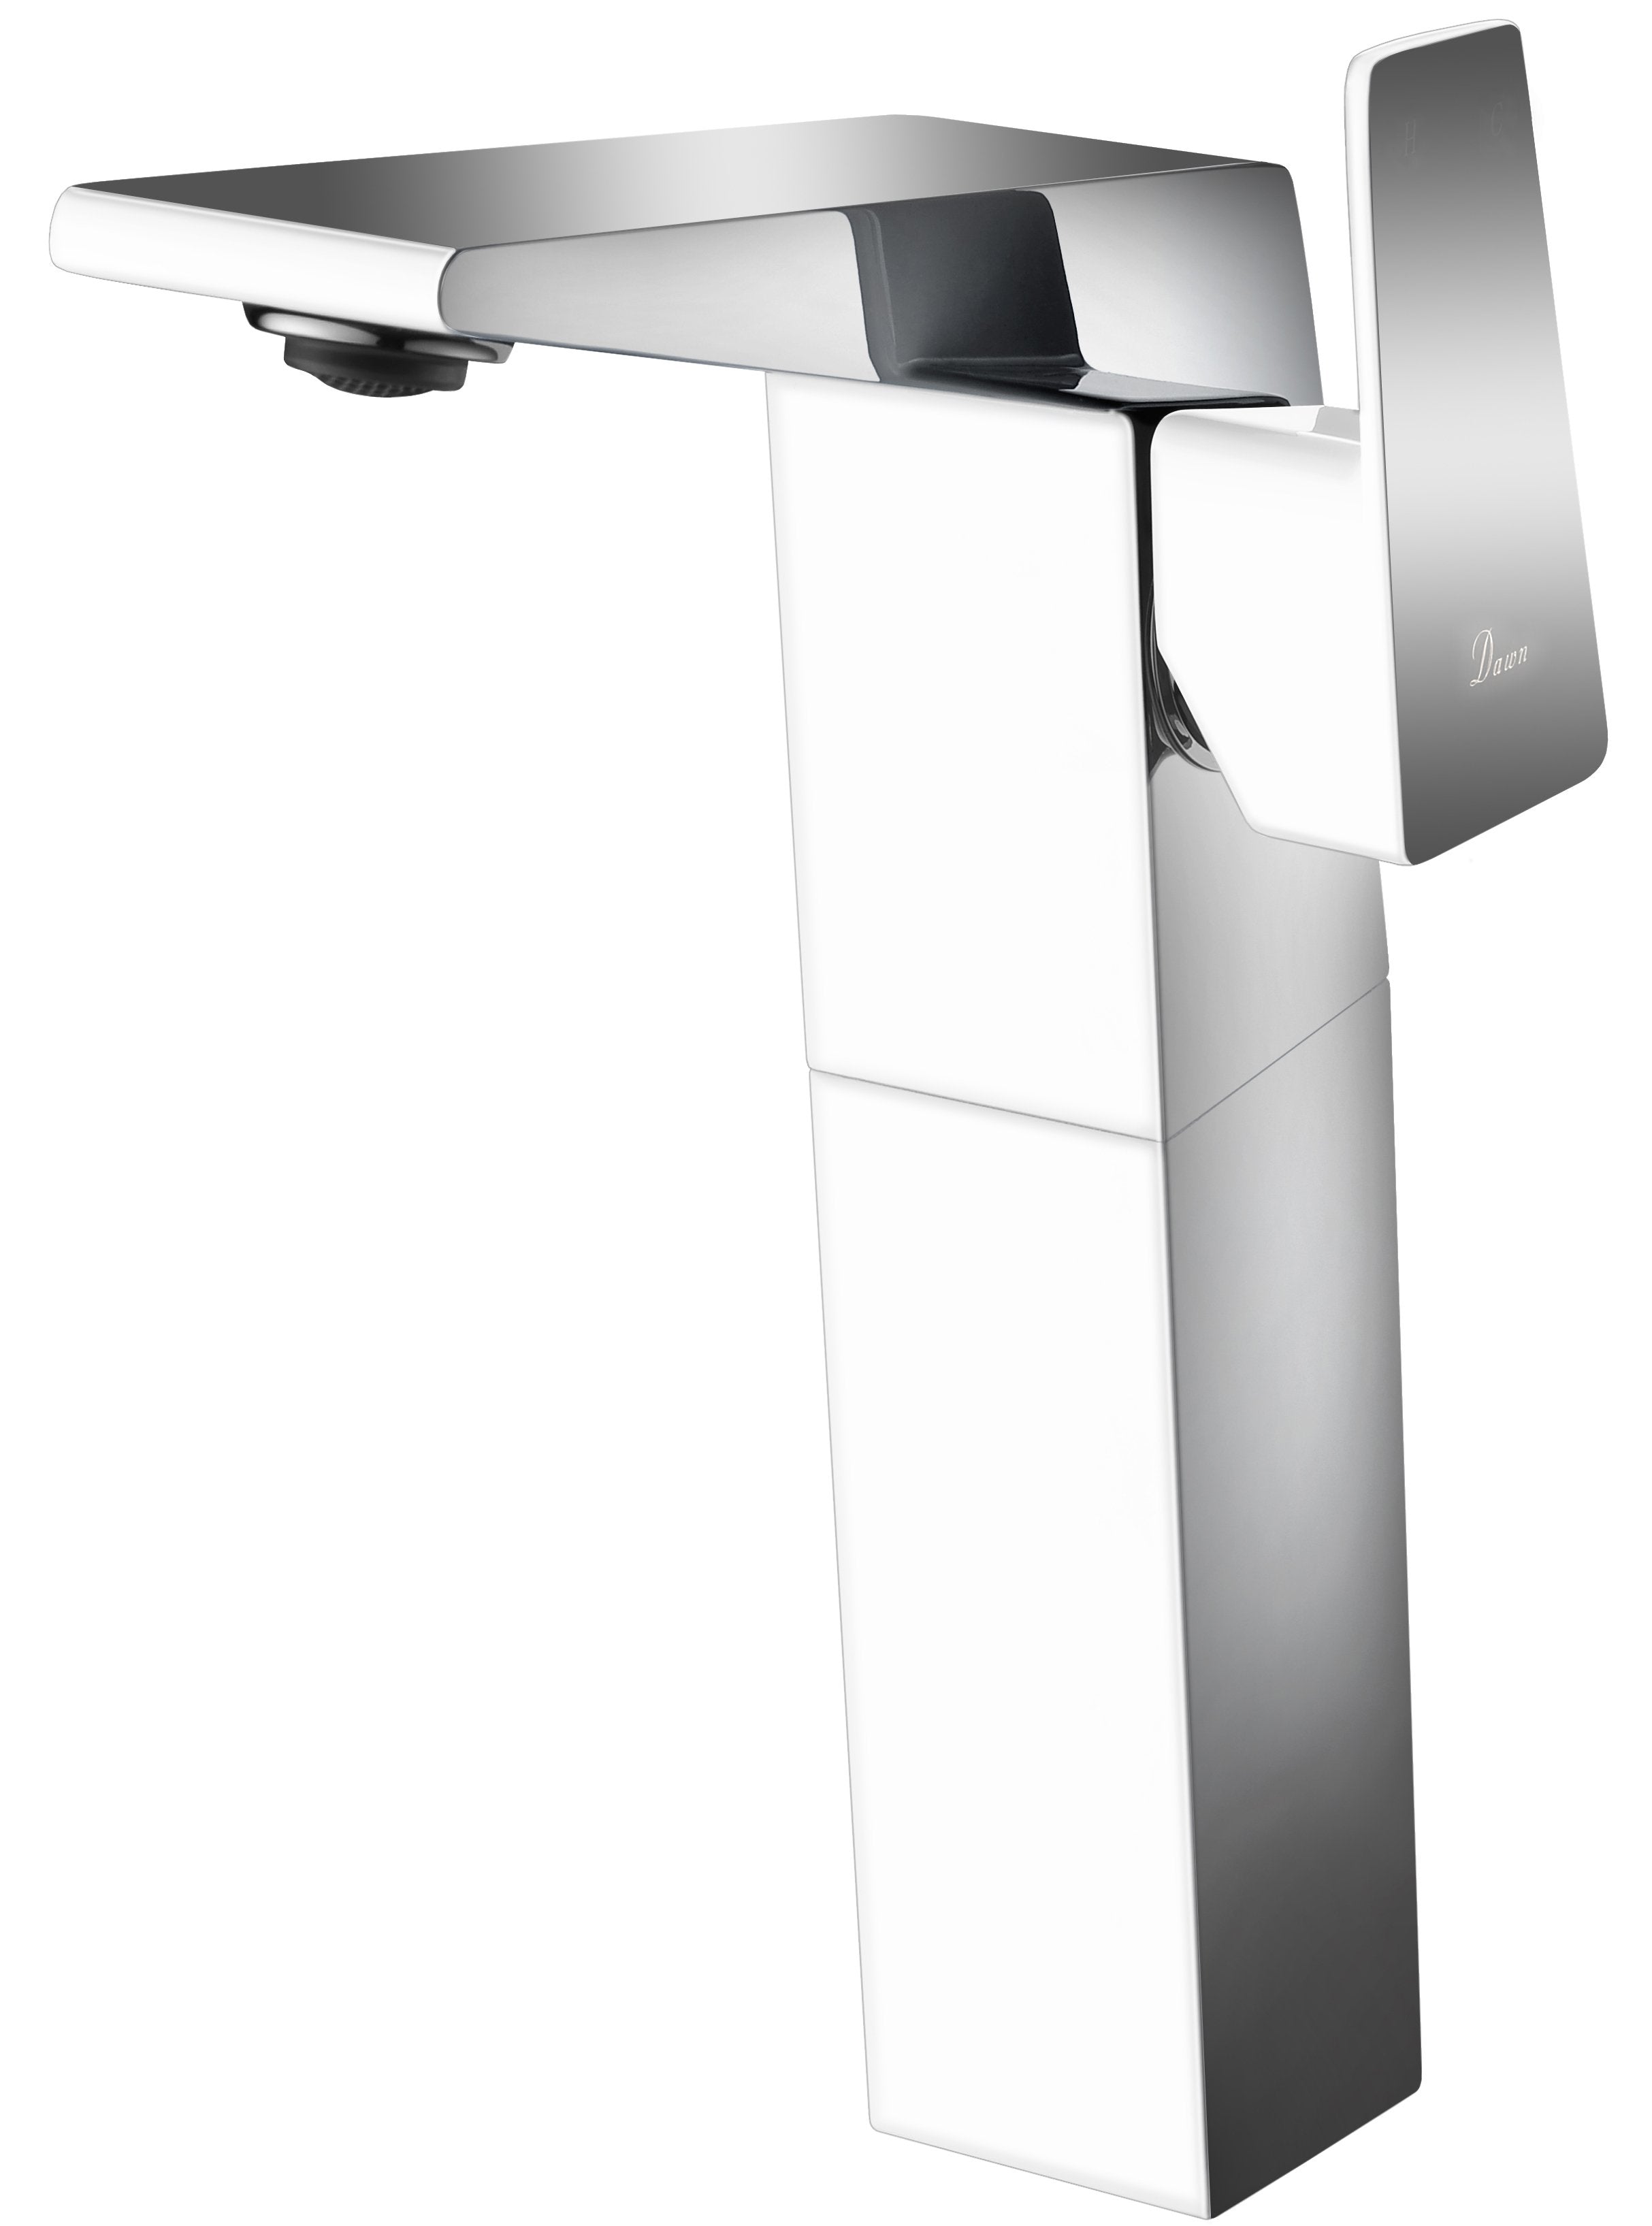 Dawn Single Lever Vessel Lavatory Faucet in Chrome and White-Bathroom Faucets Fast Shipping at DirectSinks.